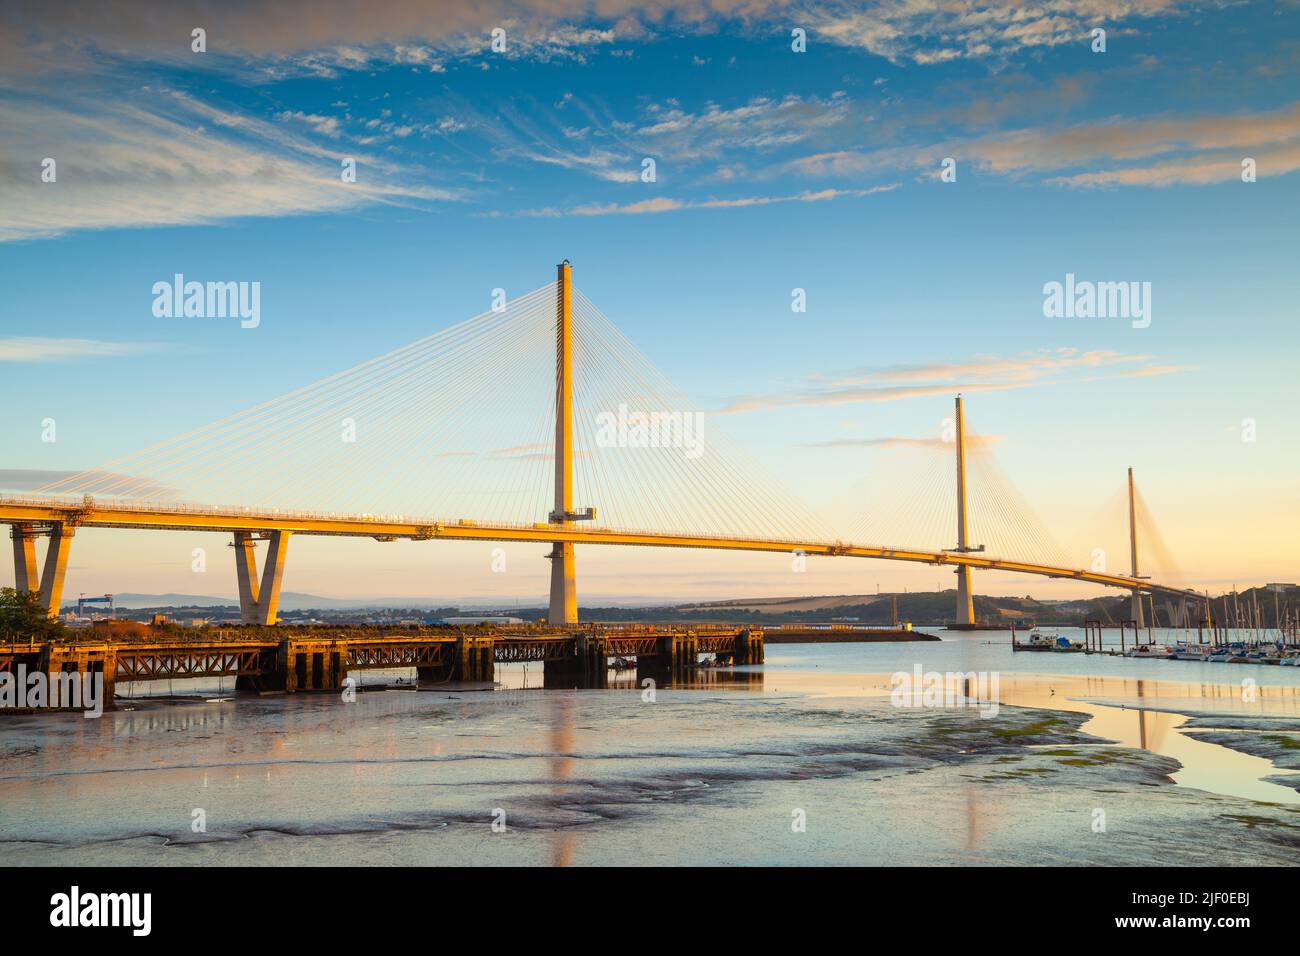 The Queensferry Crossing the new bridge over the Firth of Forth turning golden at sunrise, Edinburgh Scotland. Stock Photo